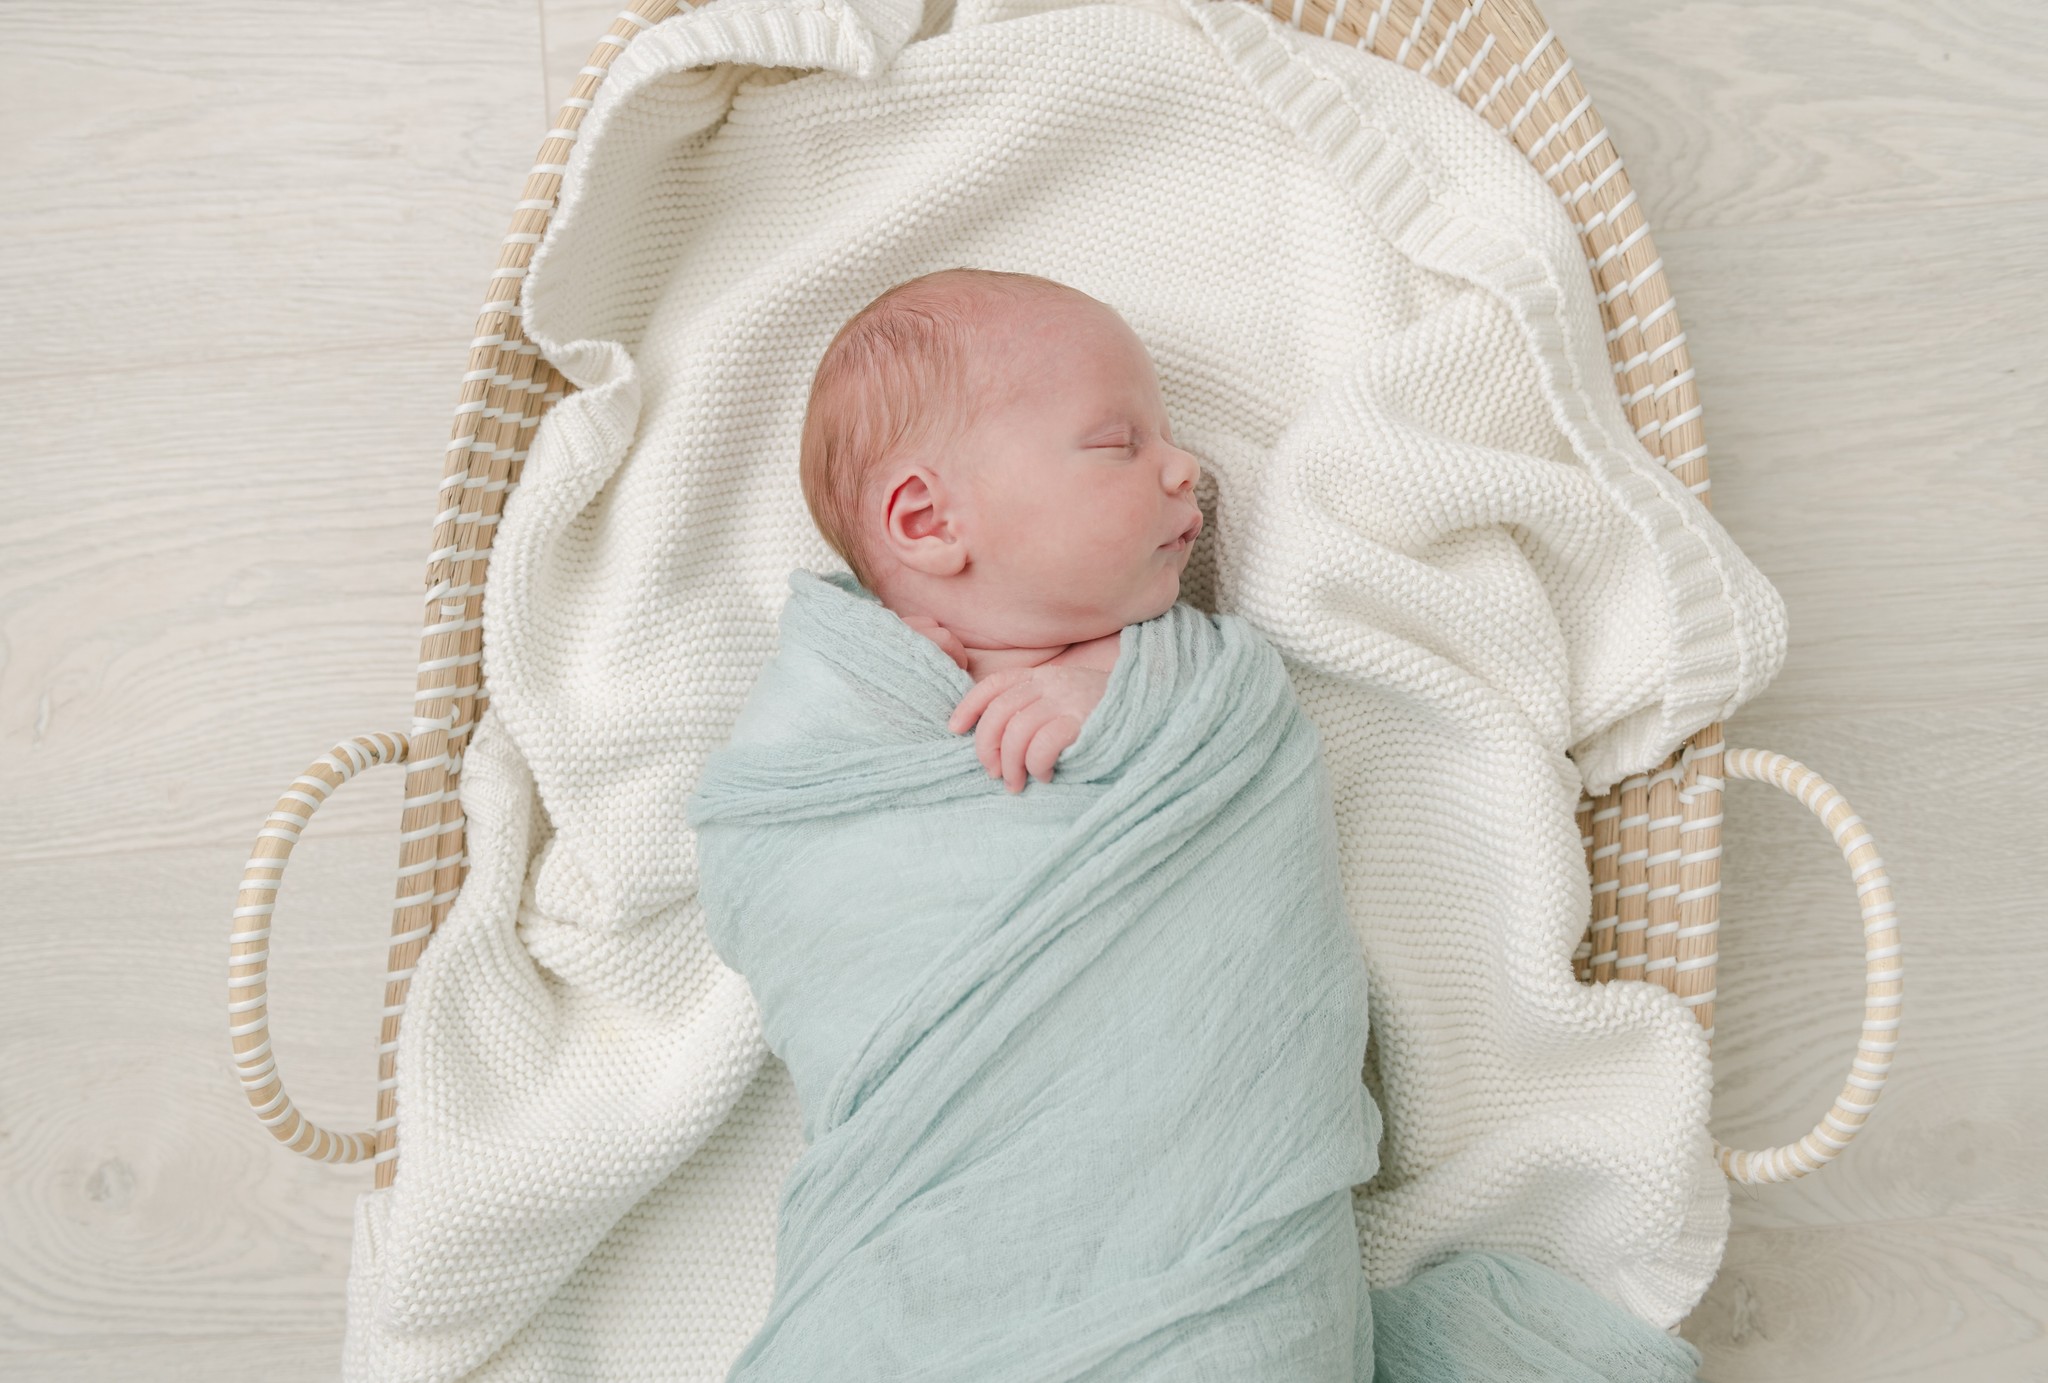 A newborn baby sleeps in a woven basket and green swaddle